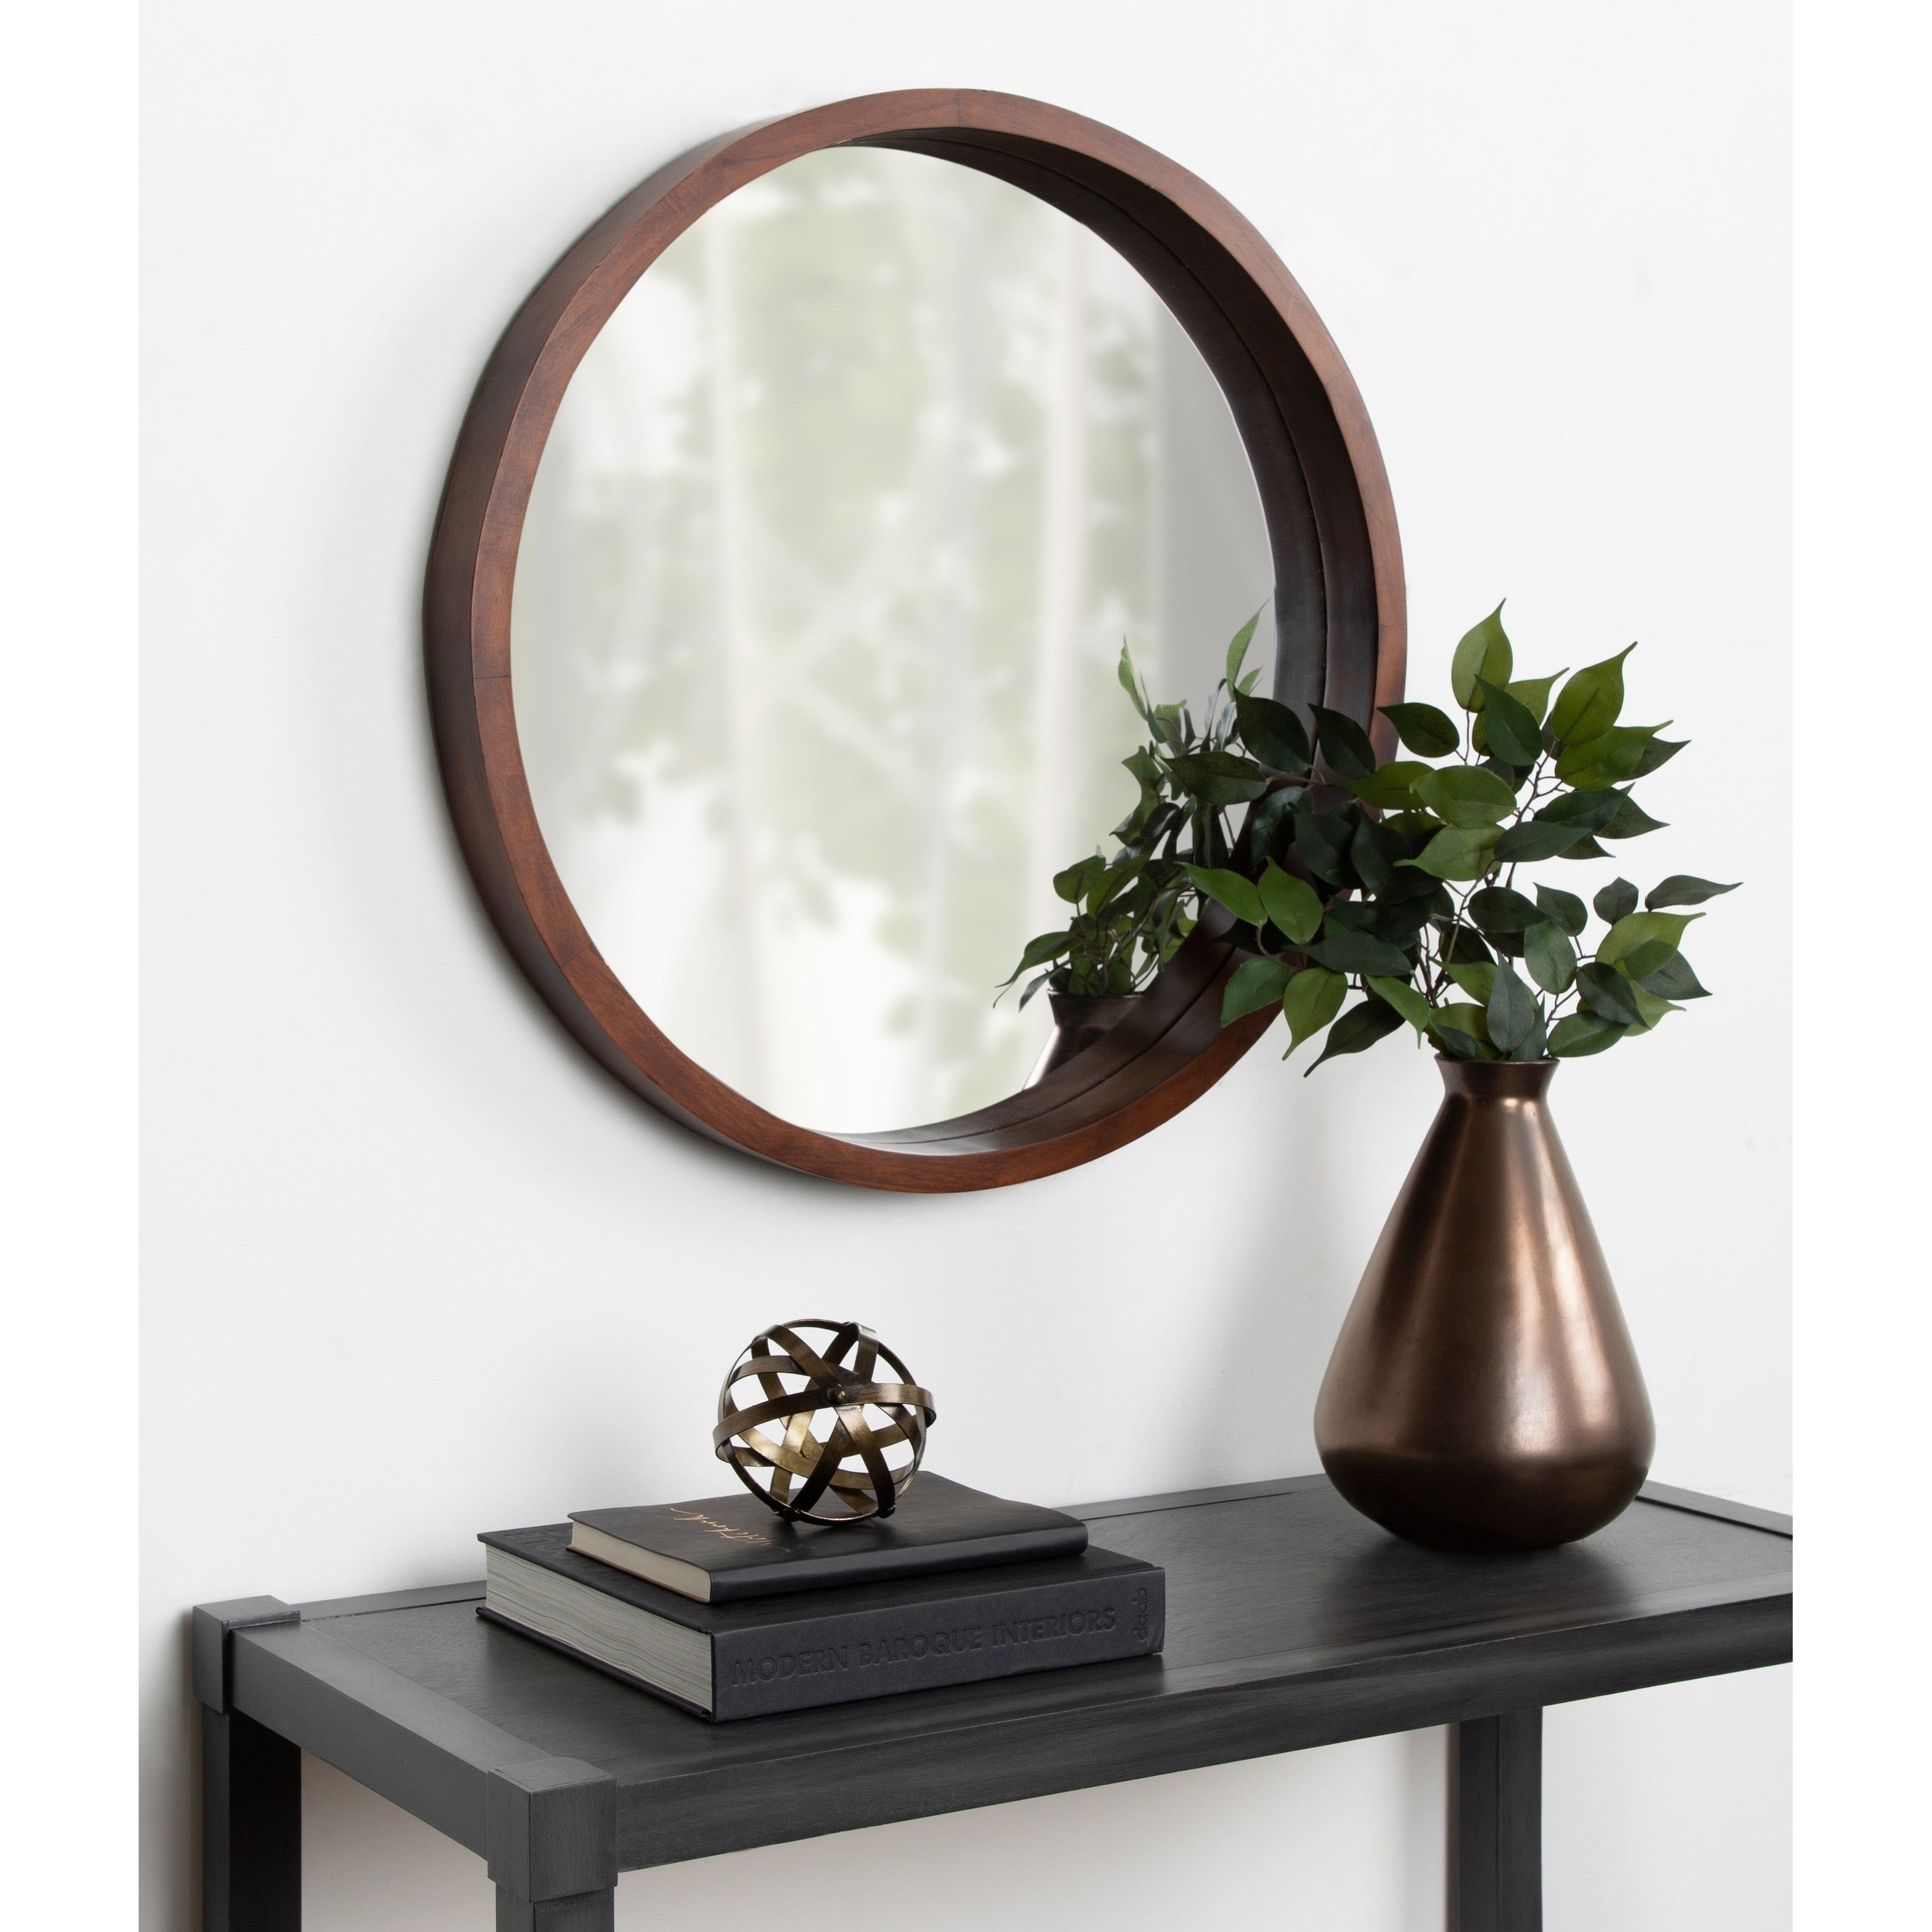 Accent Mirrors | Shop Online At Overstock Throughout Needville Modern & Contemporary Accent Mirrors (View 24 of 30)